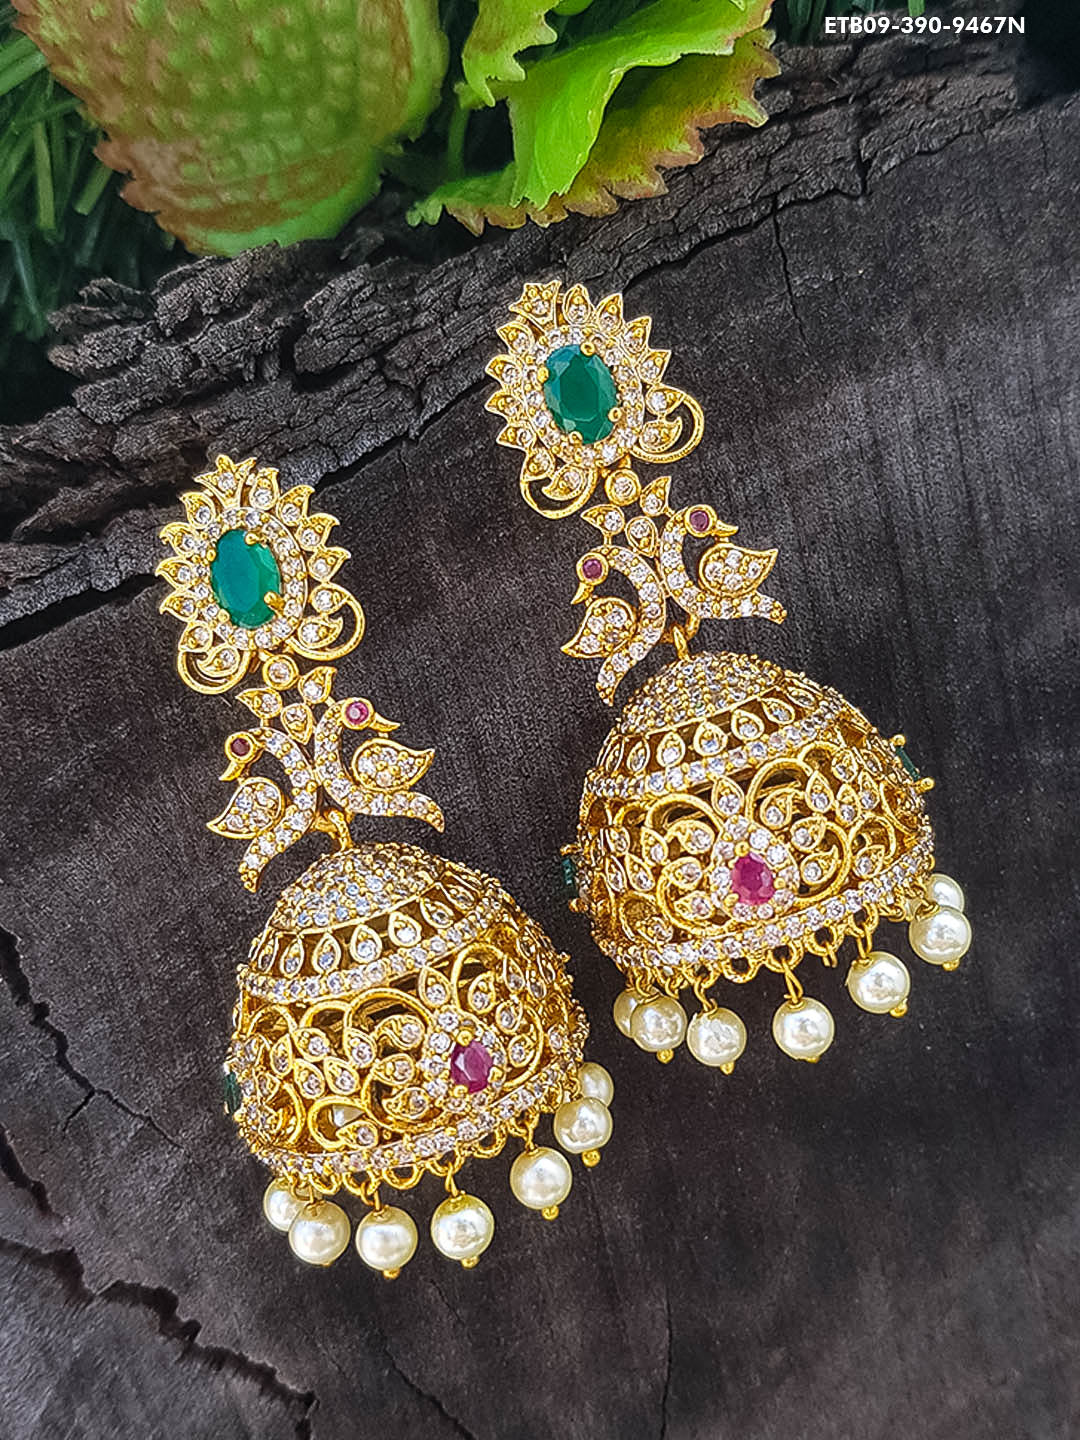 Exclusive Kemp studded Gold Plated Jhumki / Earrings 9467N